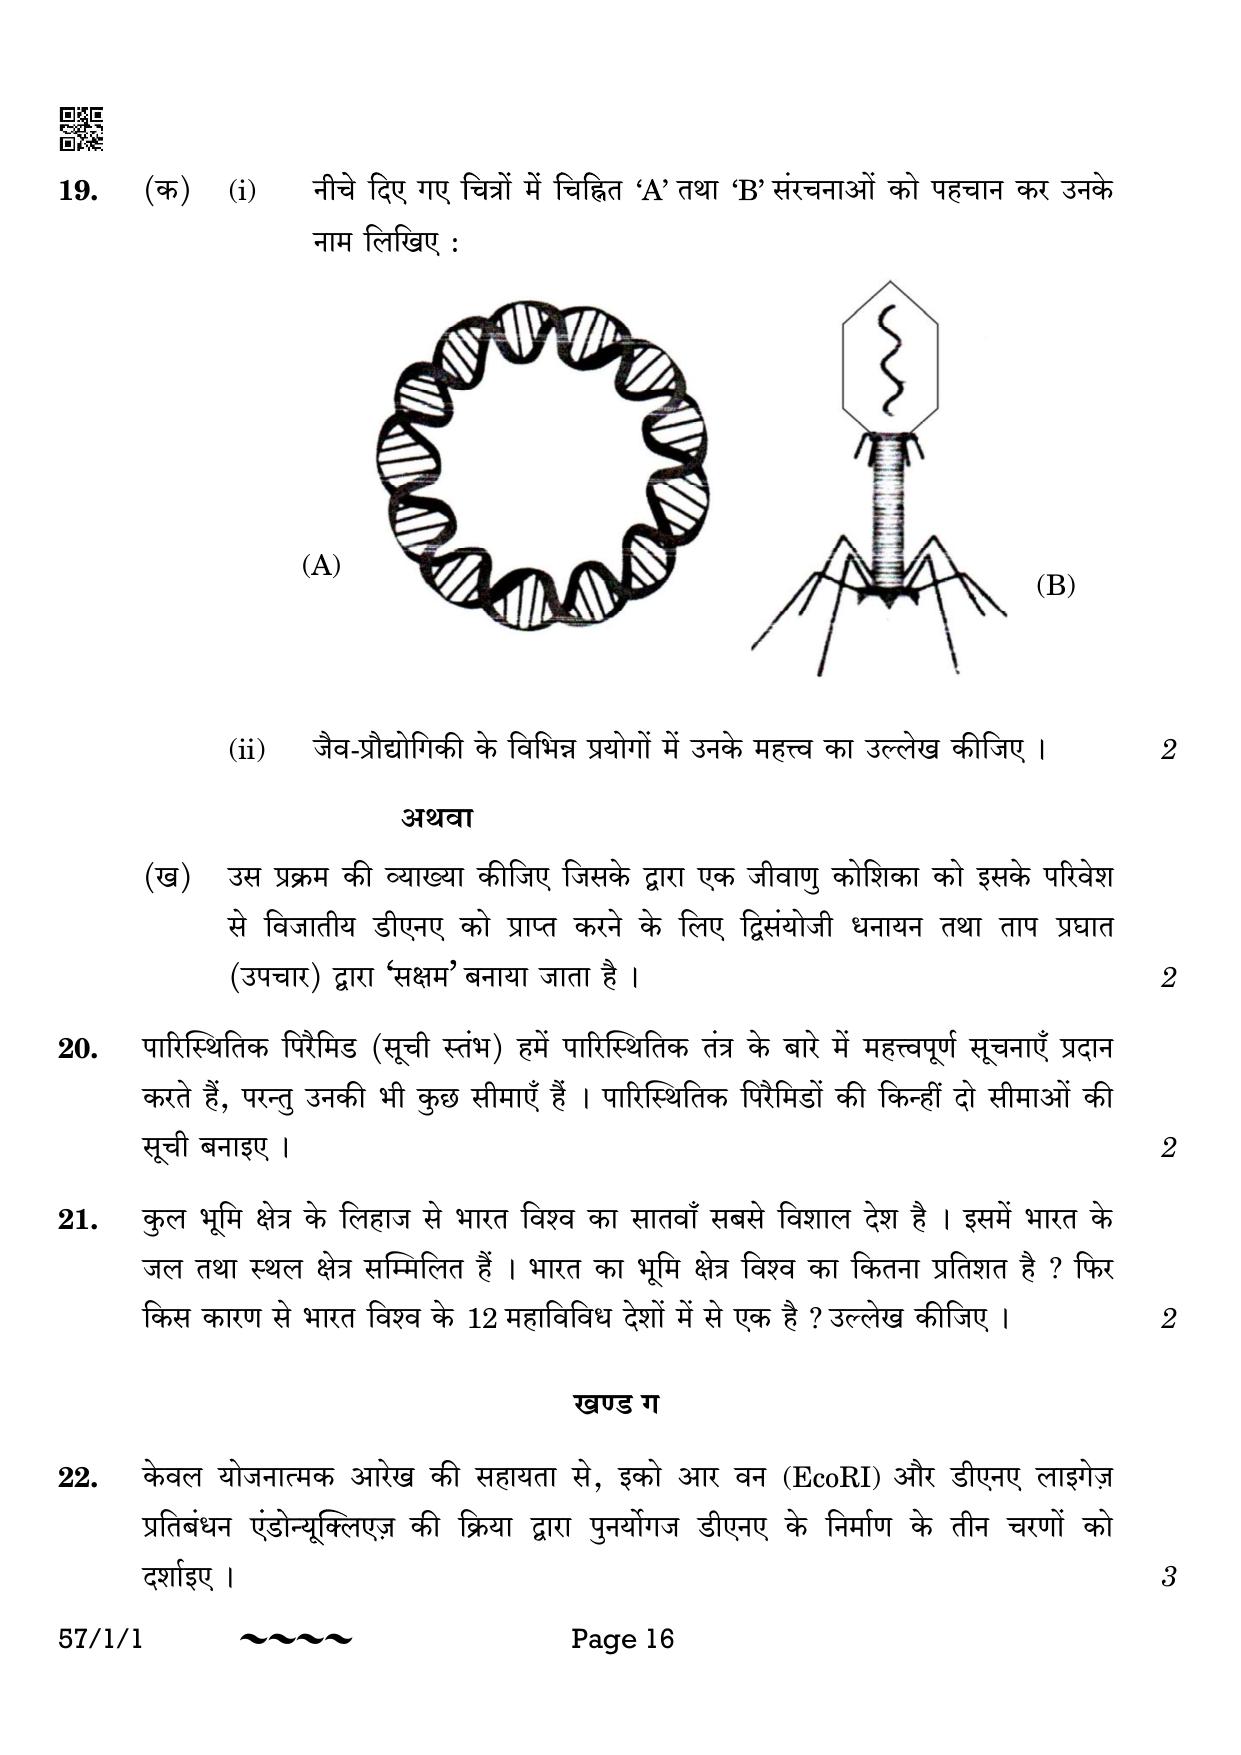 CBSE Class 12 57-1-1 Biology 2023 Question Paper - Page 16